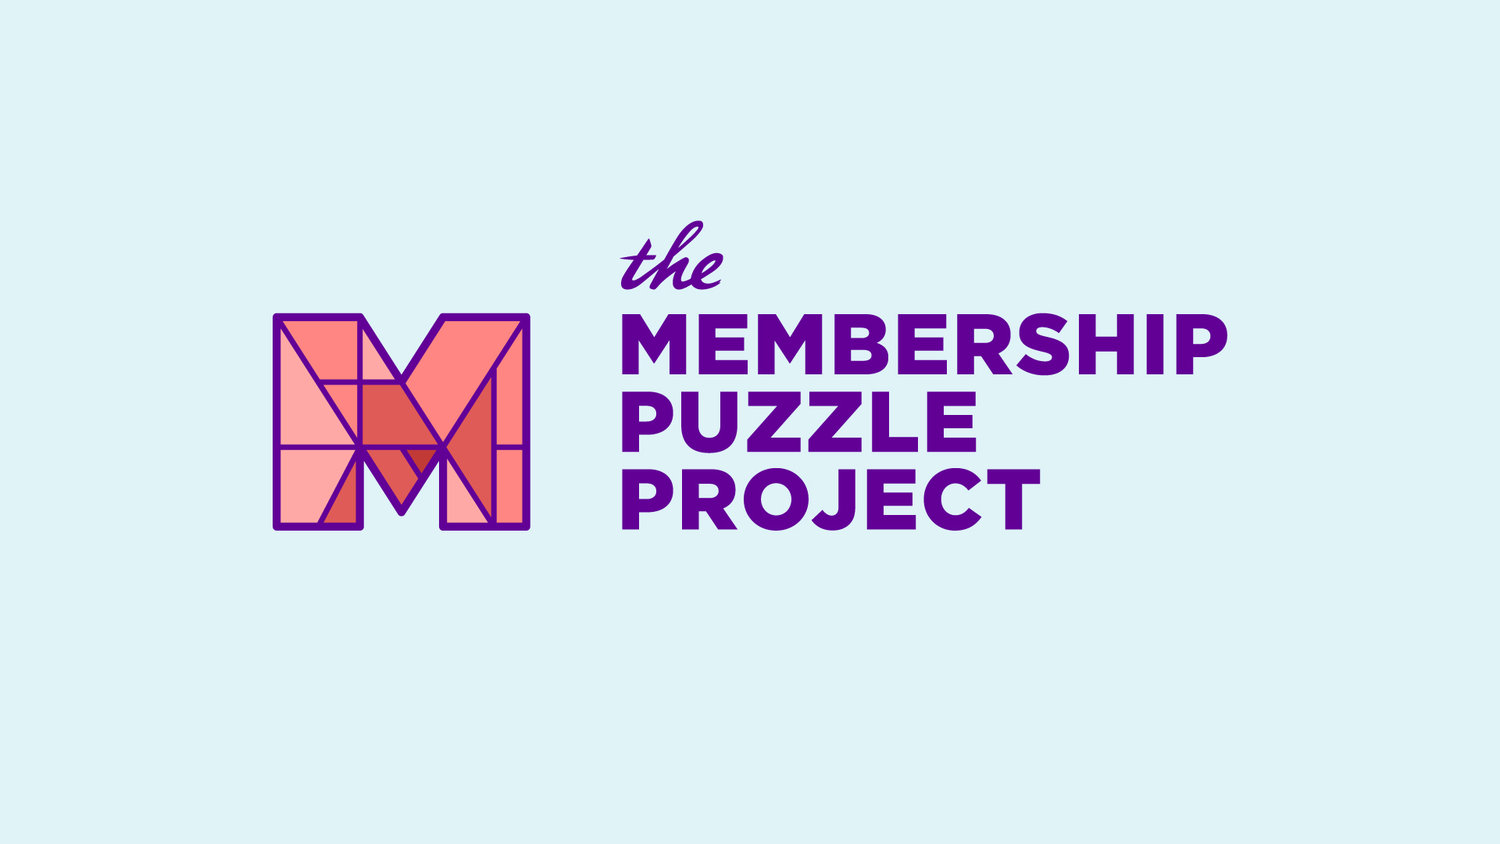 The Membership Puzzle Project is founded by